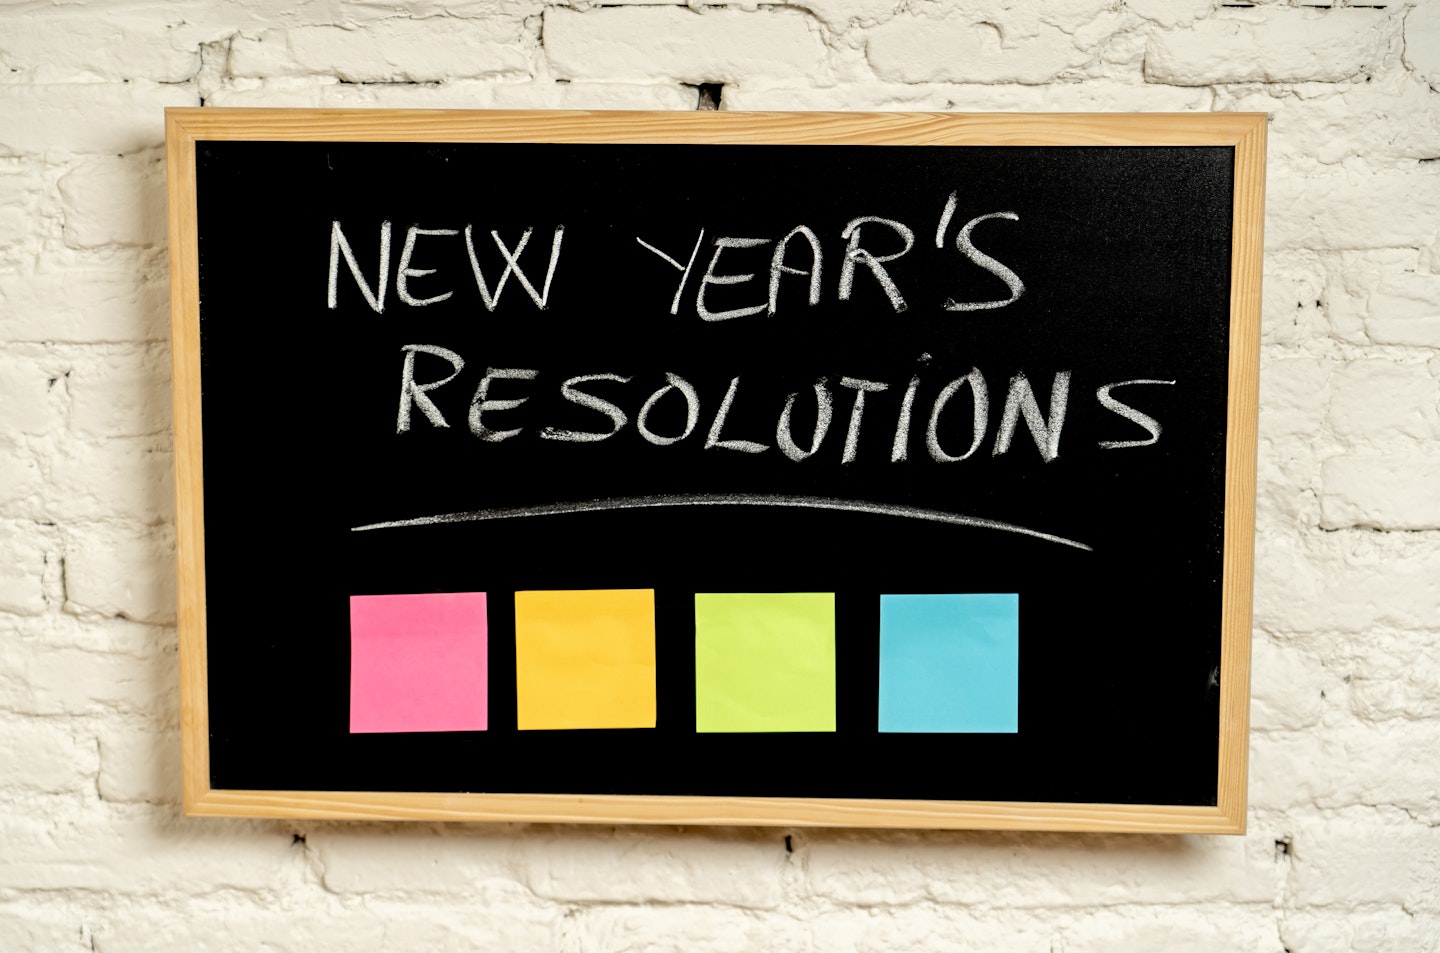 4) Other peopleu2019s resolutions remind us that even if we made one, we probably wouldnu2019t stick to it.